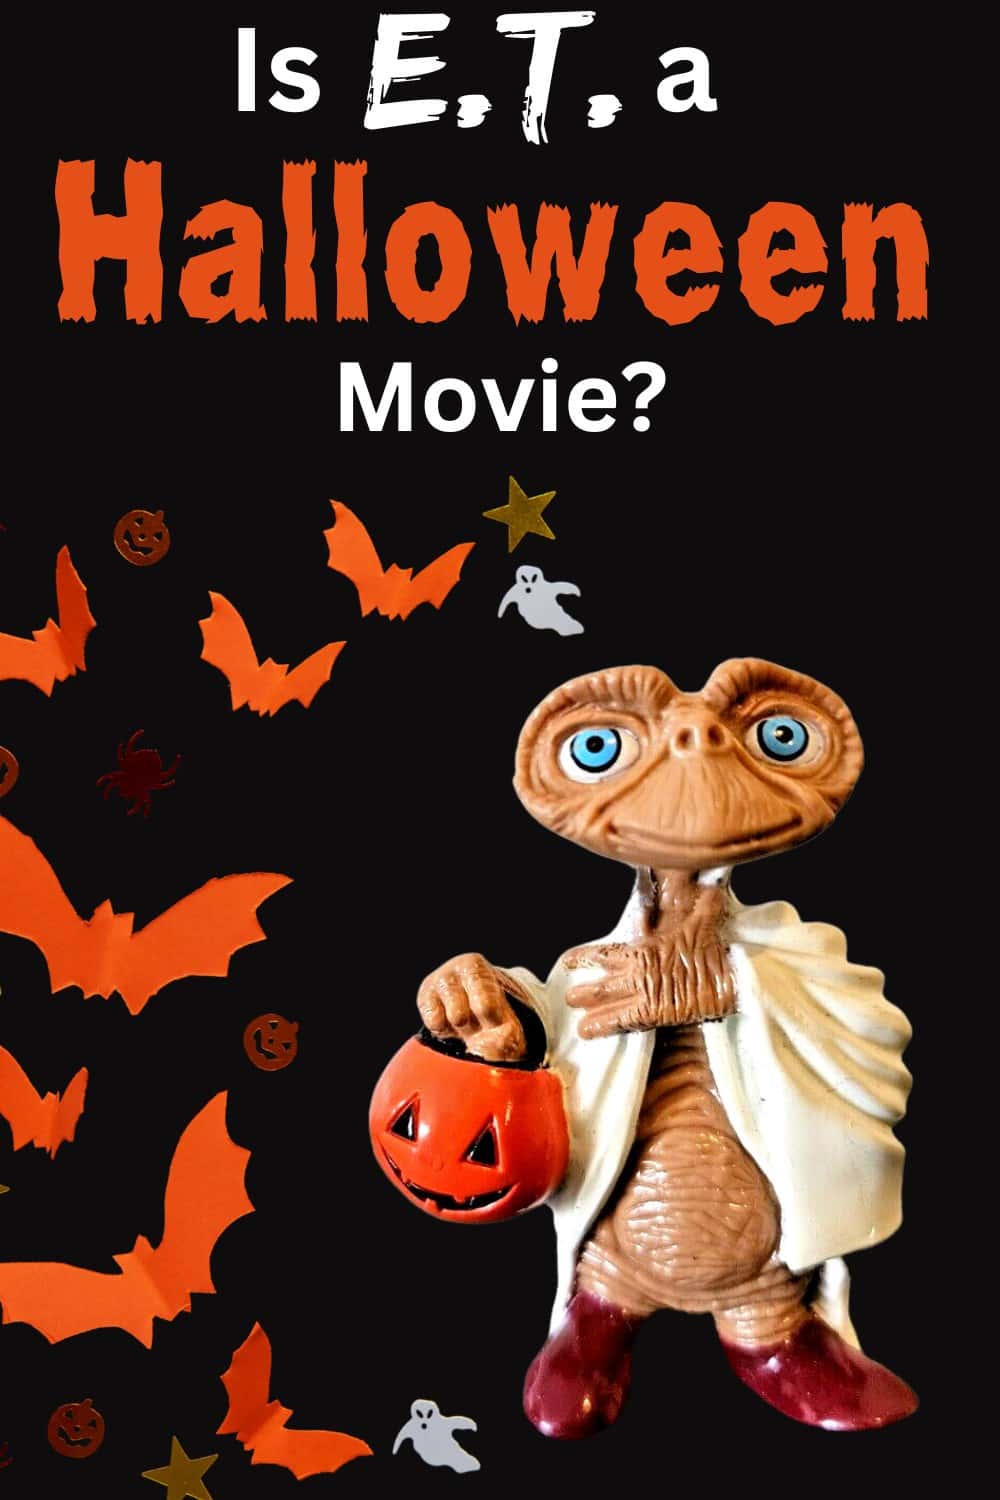 No, E.T. is not a Halloween movie